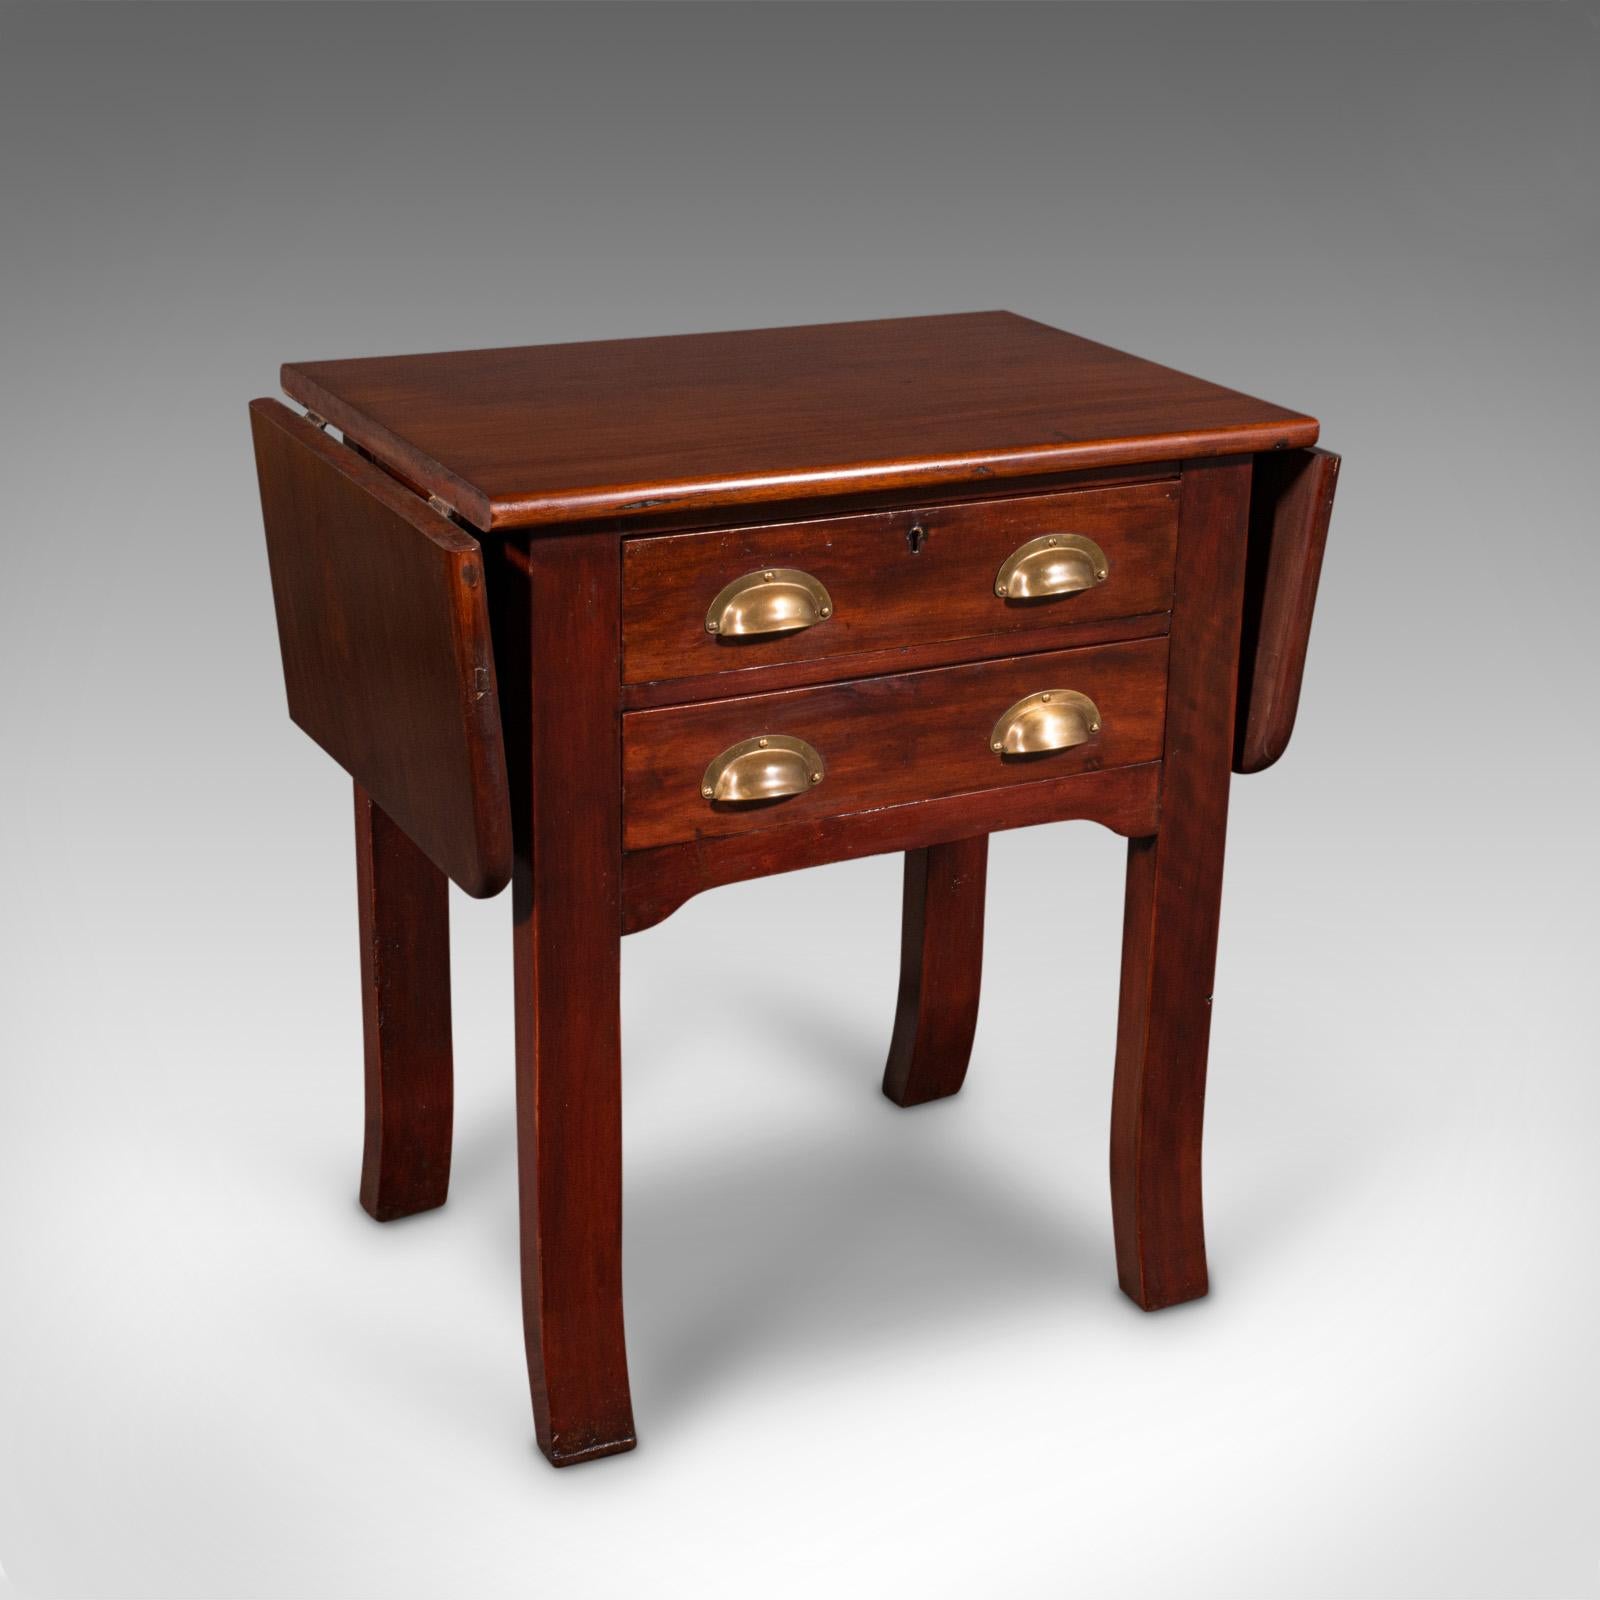 This is an antique bookbinder's press table. An English, mahogany and brass drop-flap occasional table, dating to the Victorian period, circa 1880.

Delightfully petite, with superb quality and appealing form
Displays a desirable aged patina and